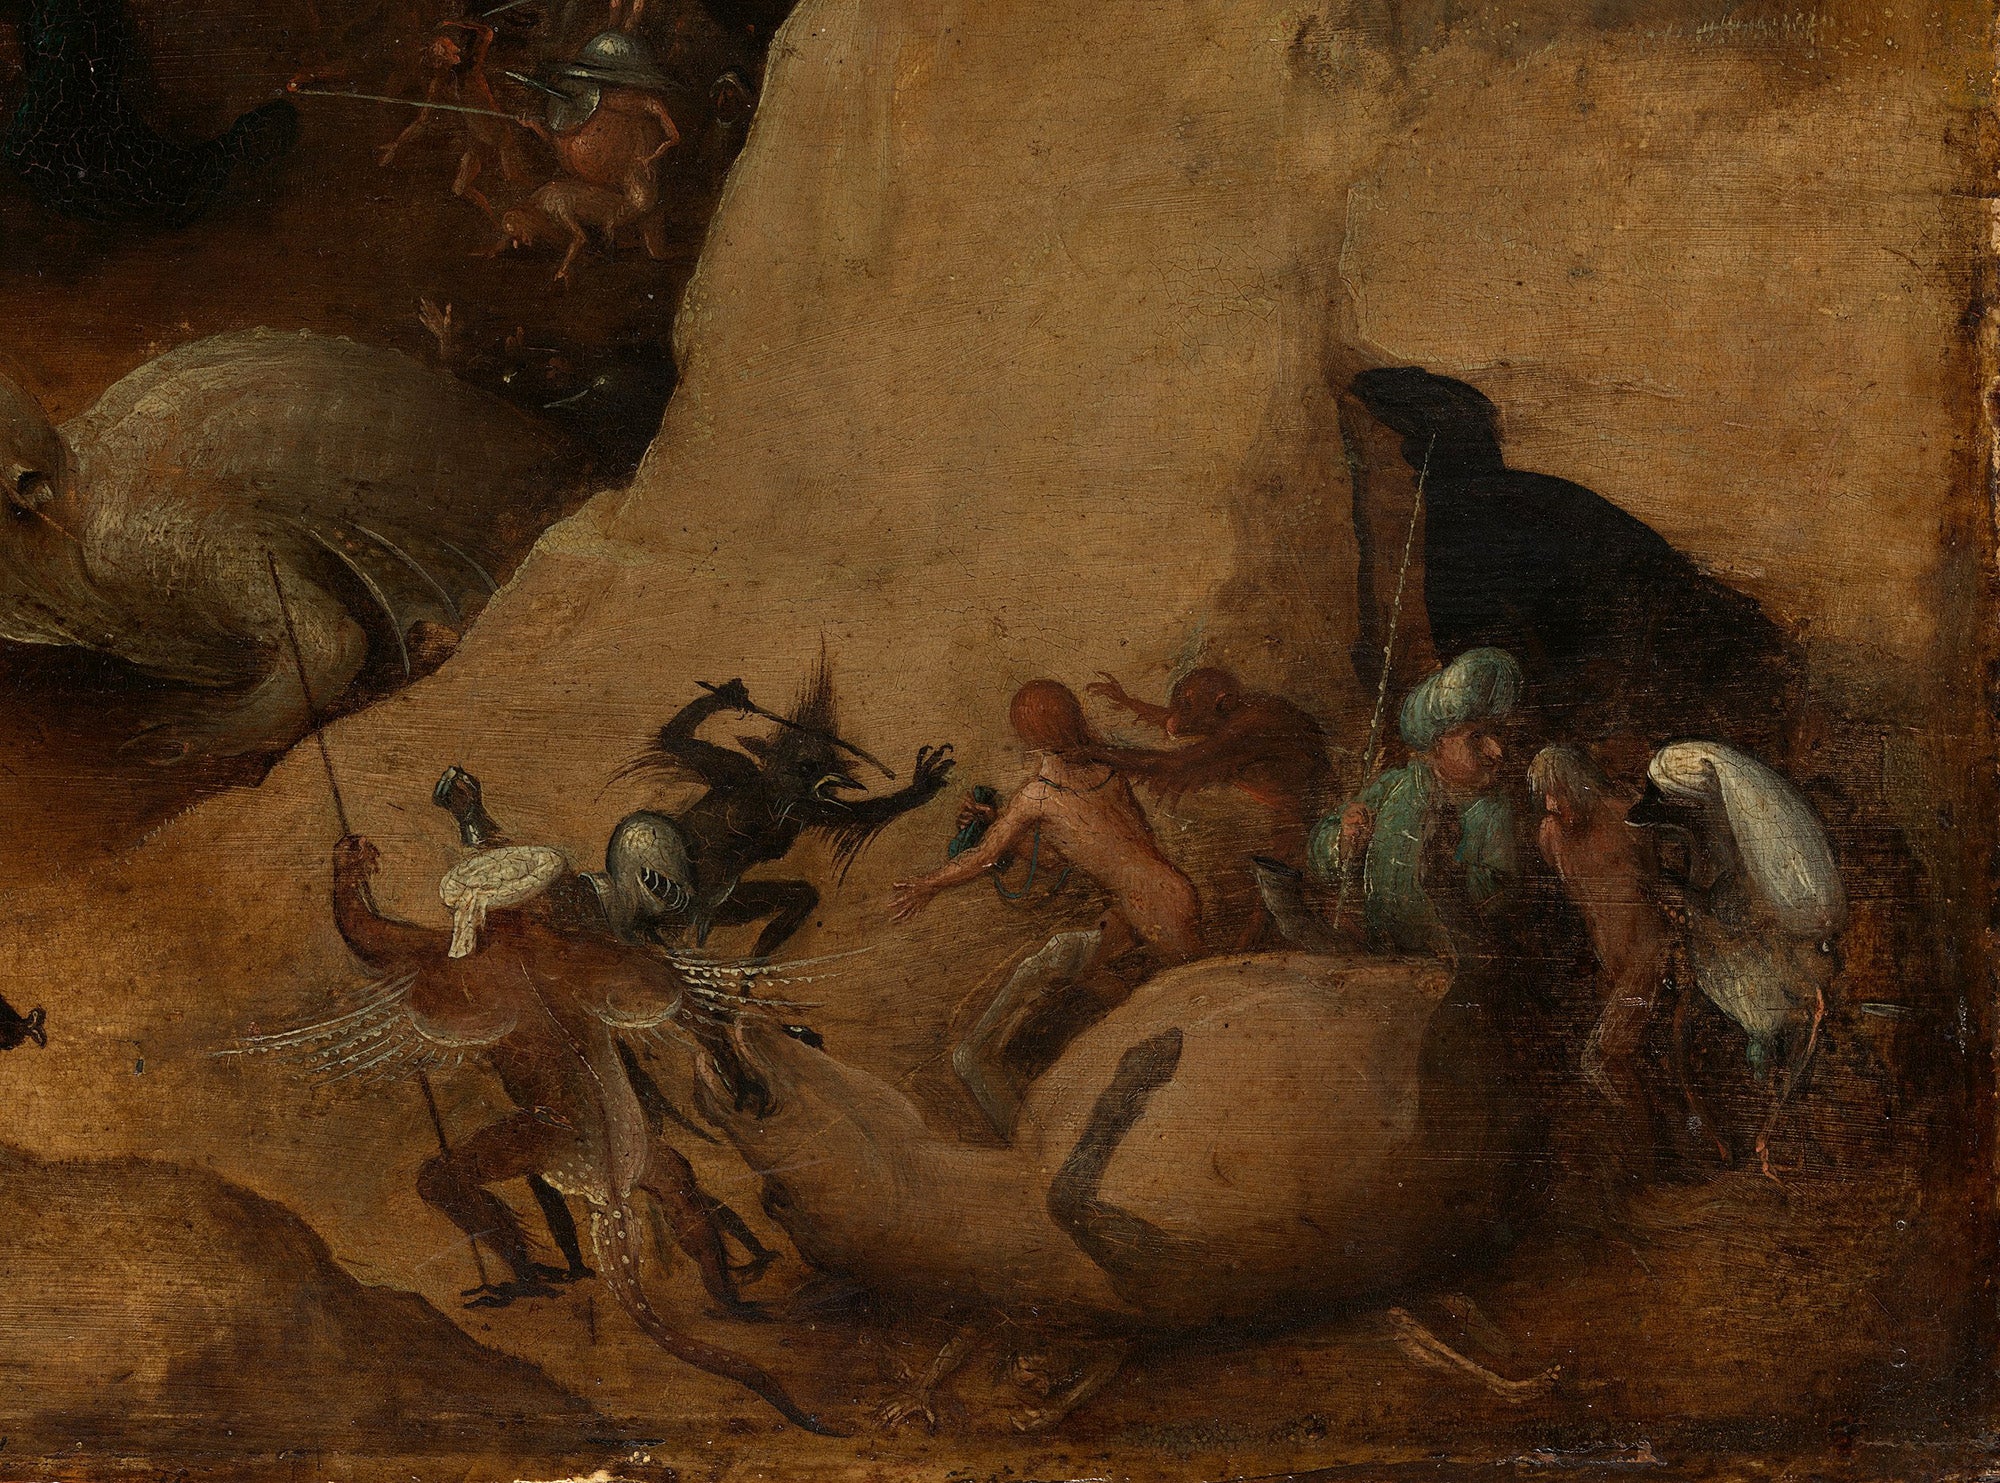 Detail from Christ's Descent into Hell by Hieronymus Bosch